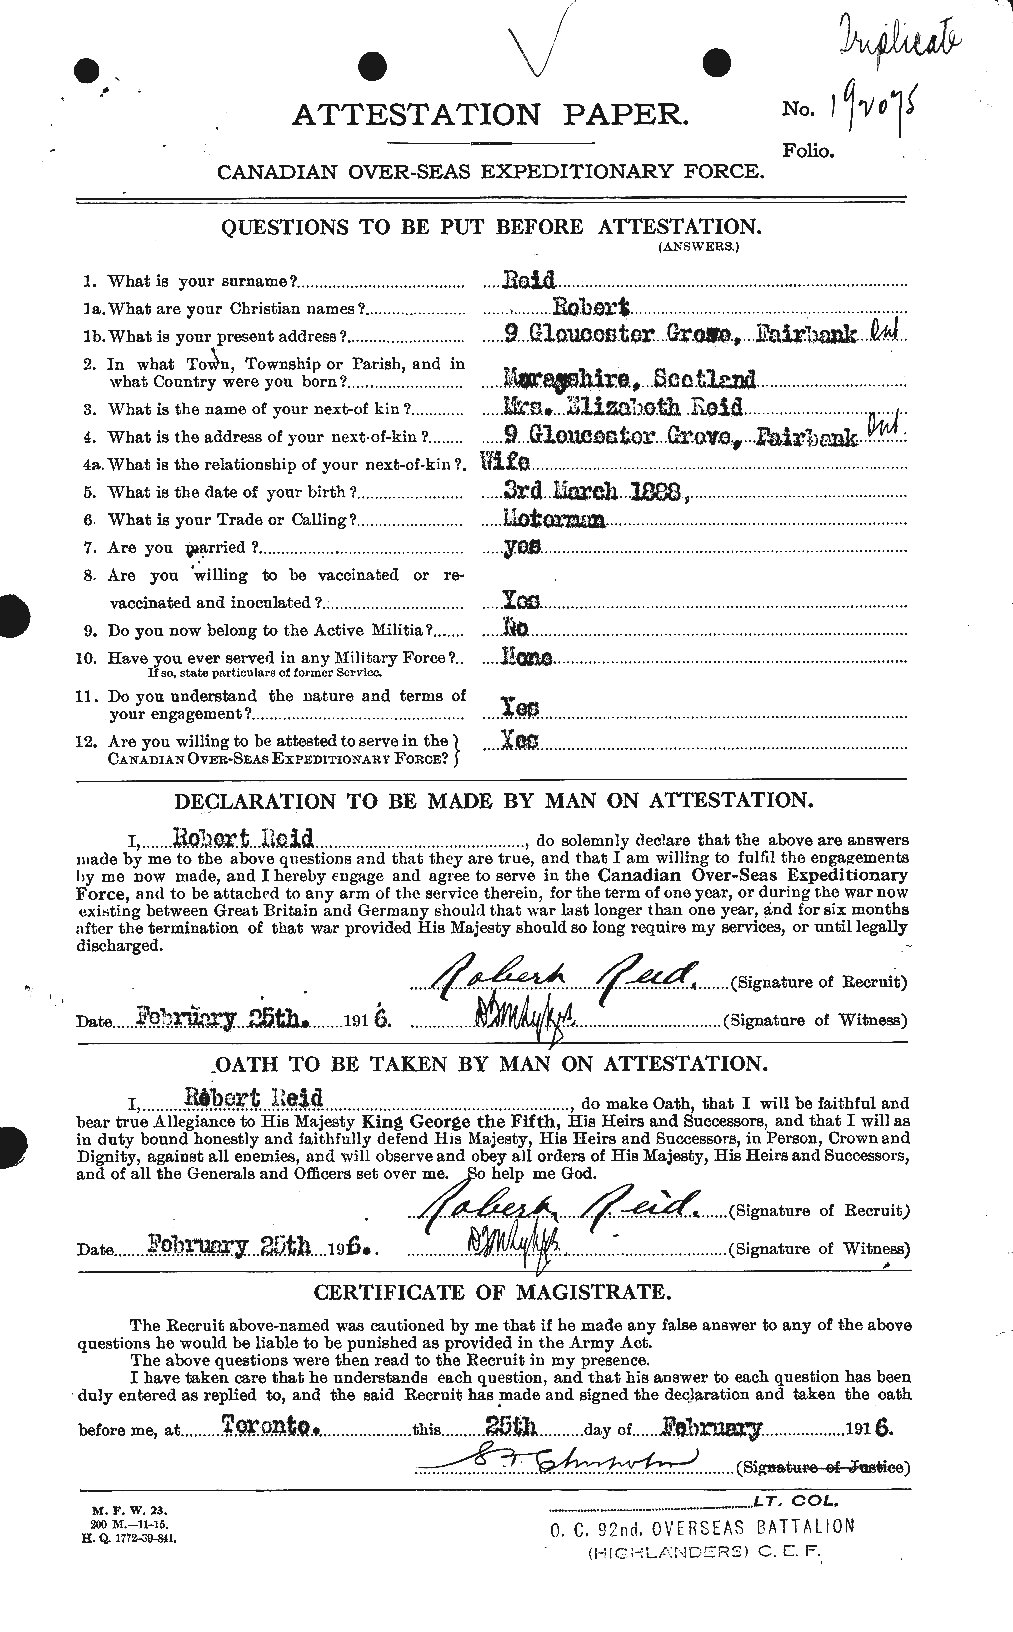 Personnel Records of the First World War - CEF 601876a